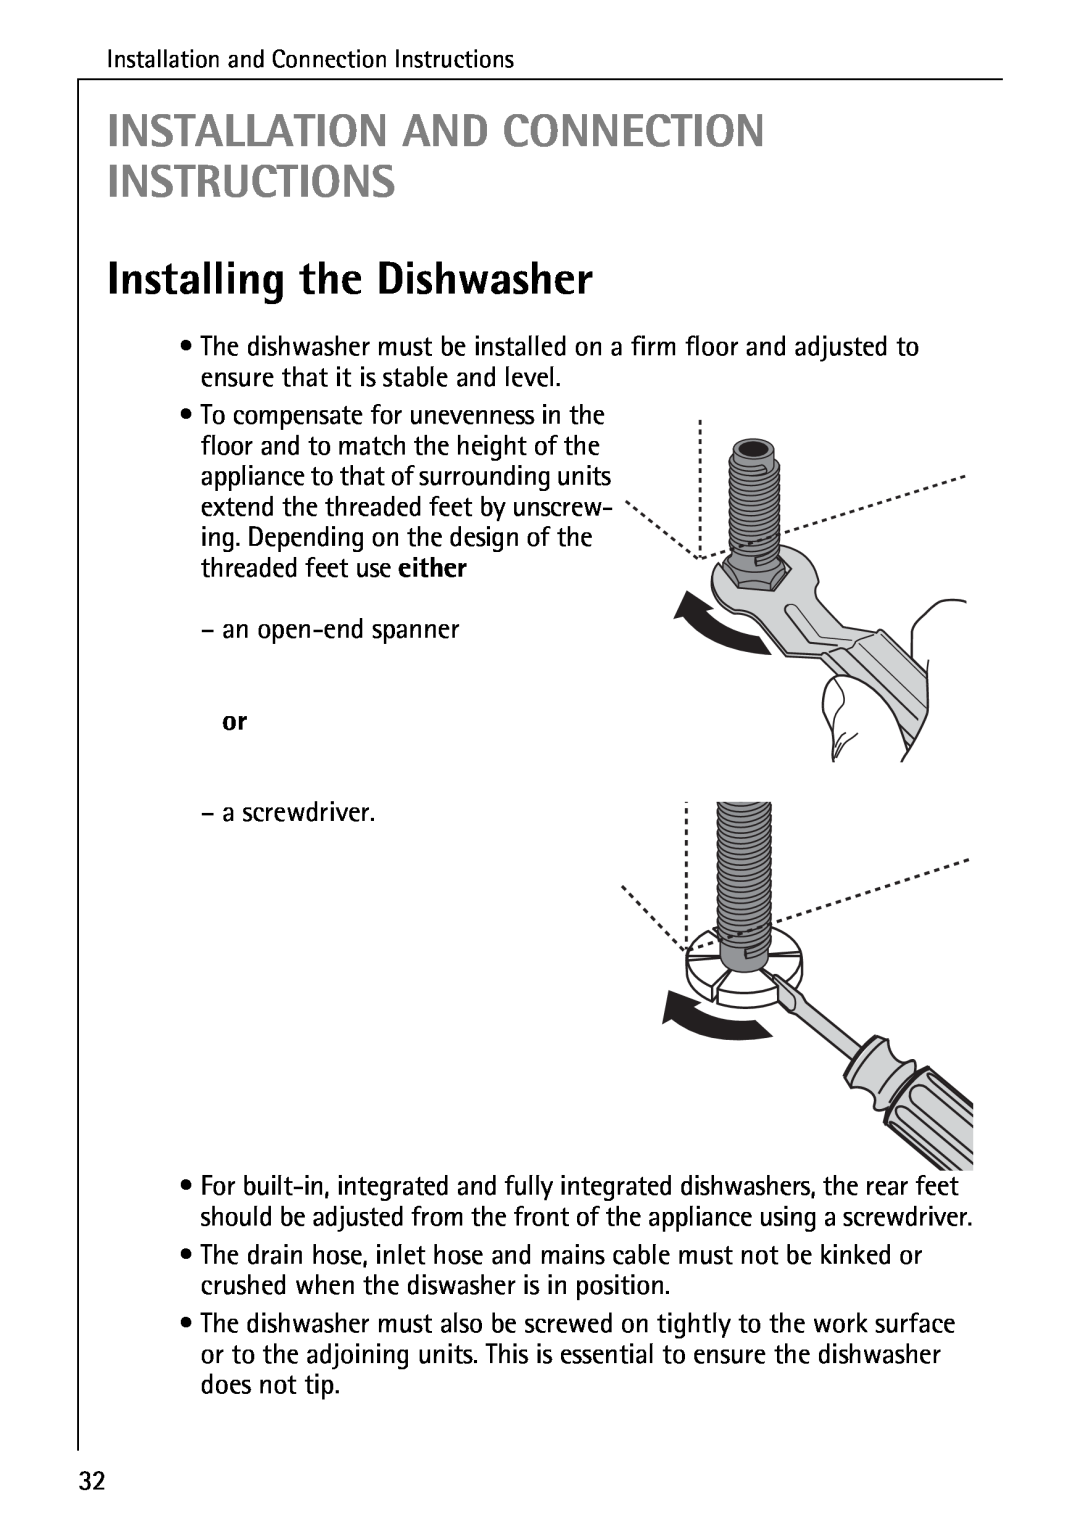 AEG 6281 I manual Installation And Connection Instructions, Installing the Dishwasher 